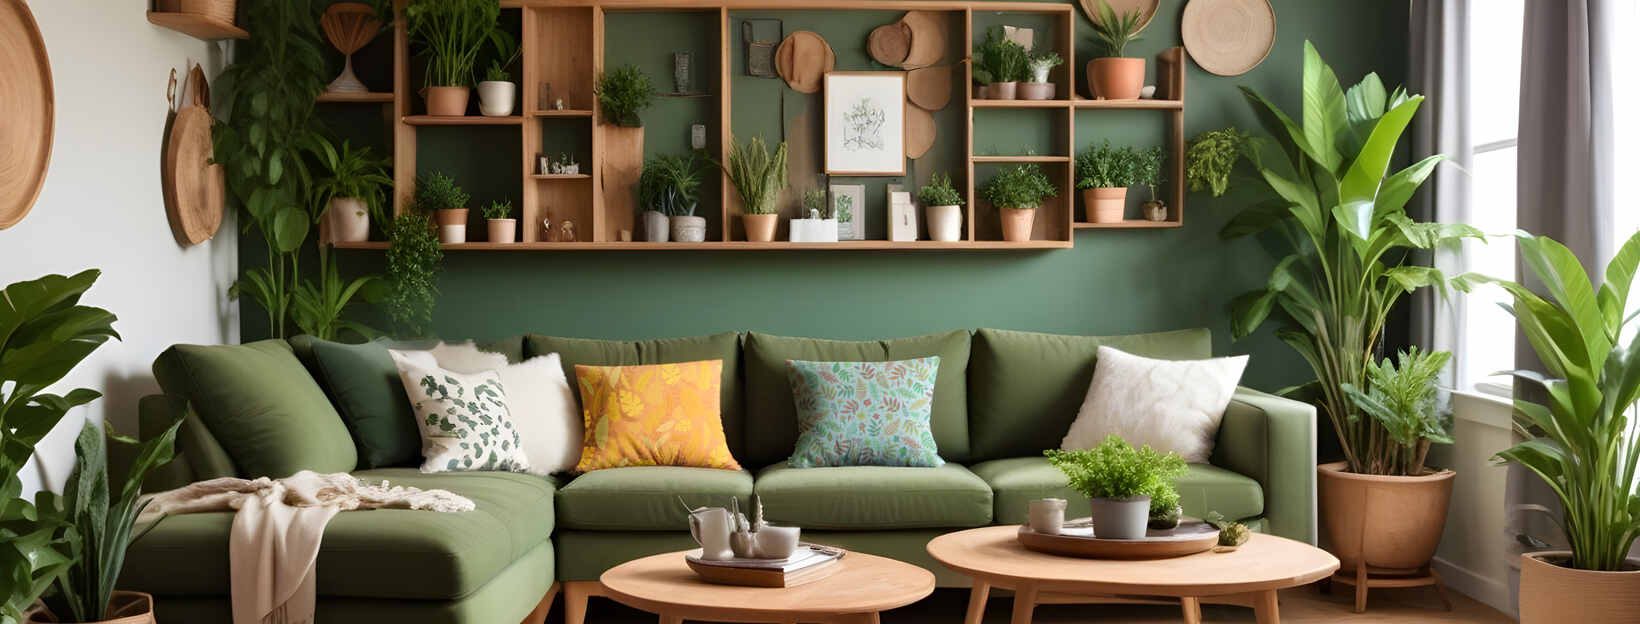 How to Live Green: 6 Sustainable Decor Ideas for World Environment Day!